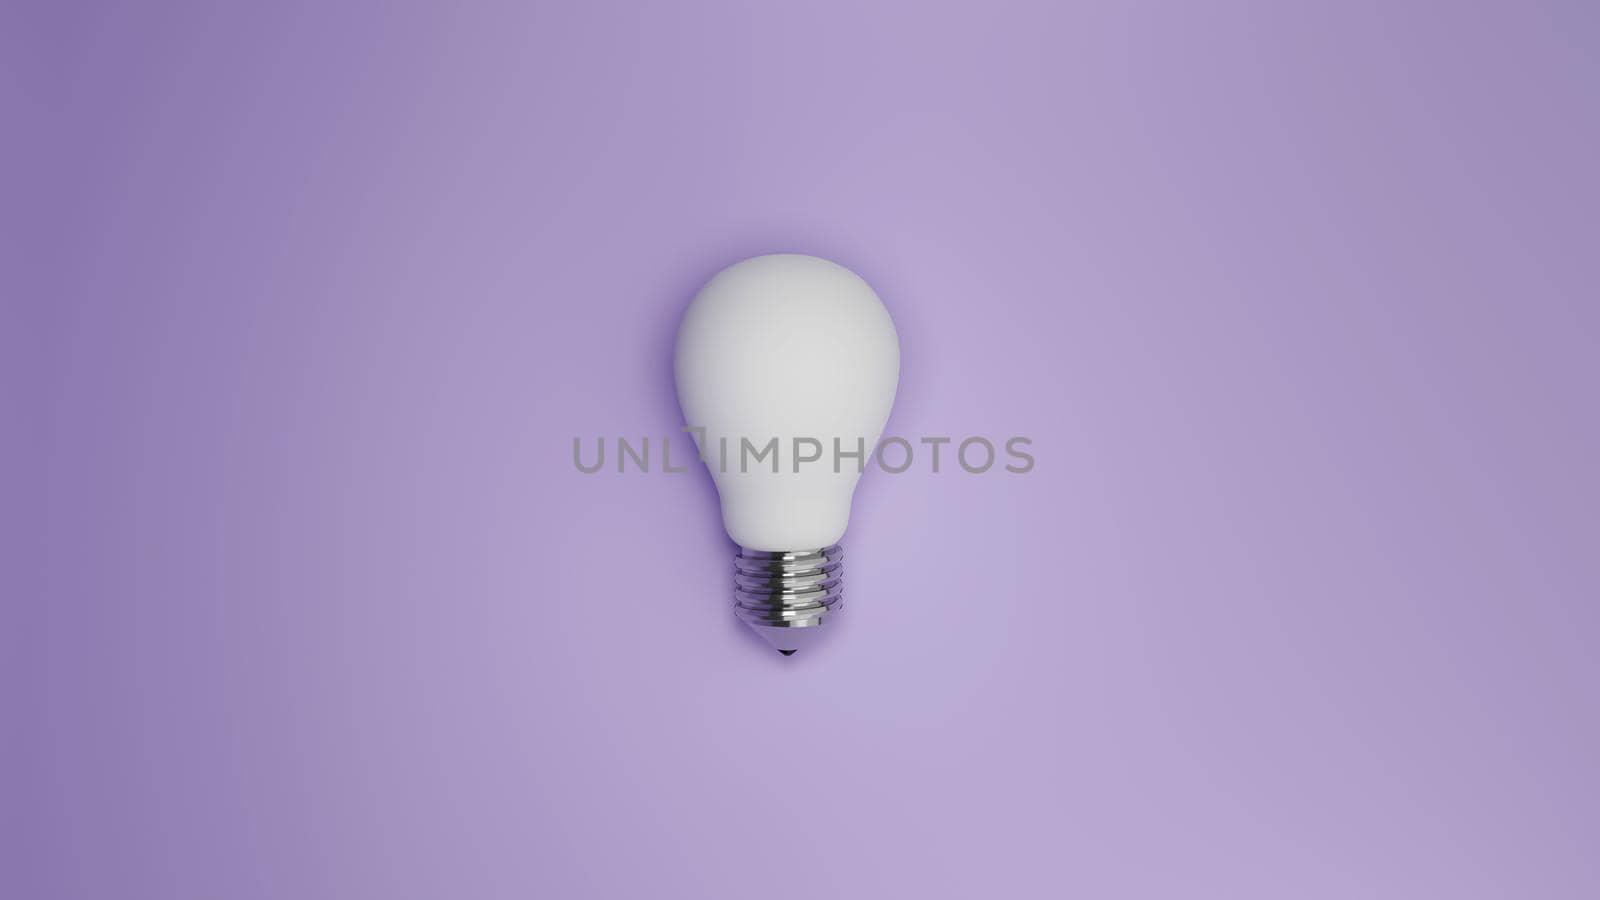 Blue light bulb on bright purple background in pastel colors. Minimalism concept. 3d render illustration by raferto1973